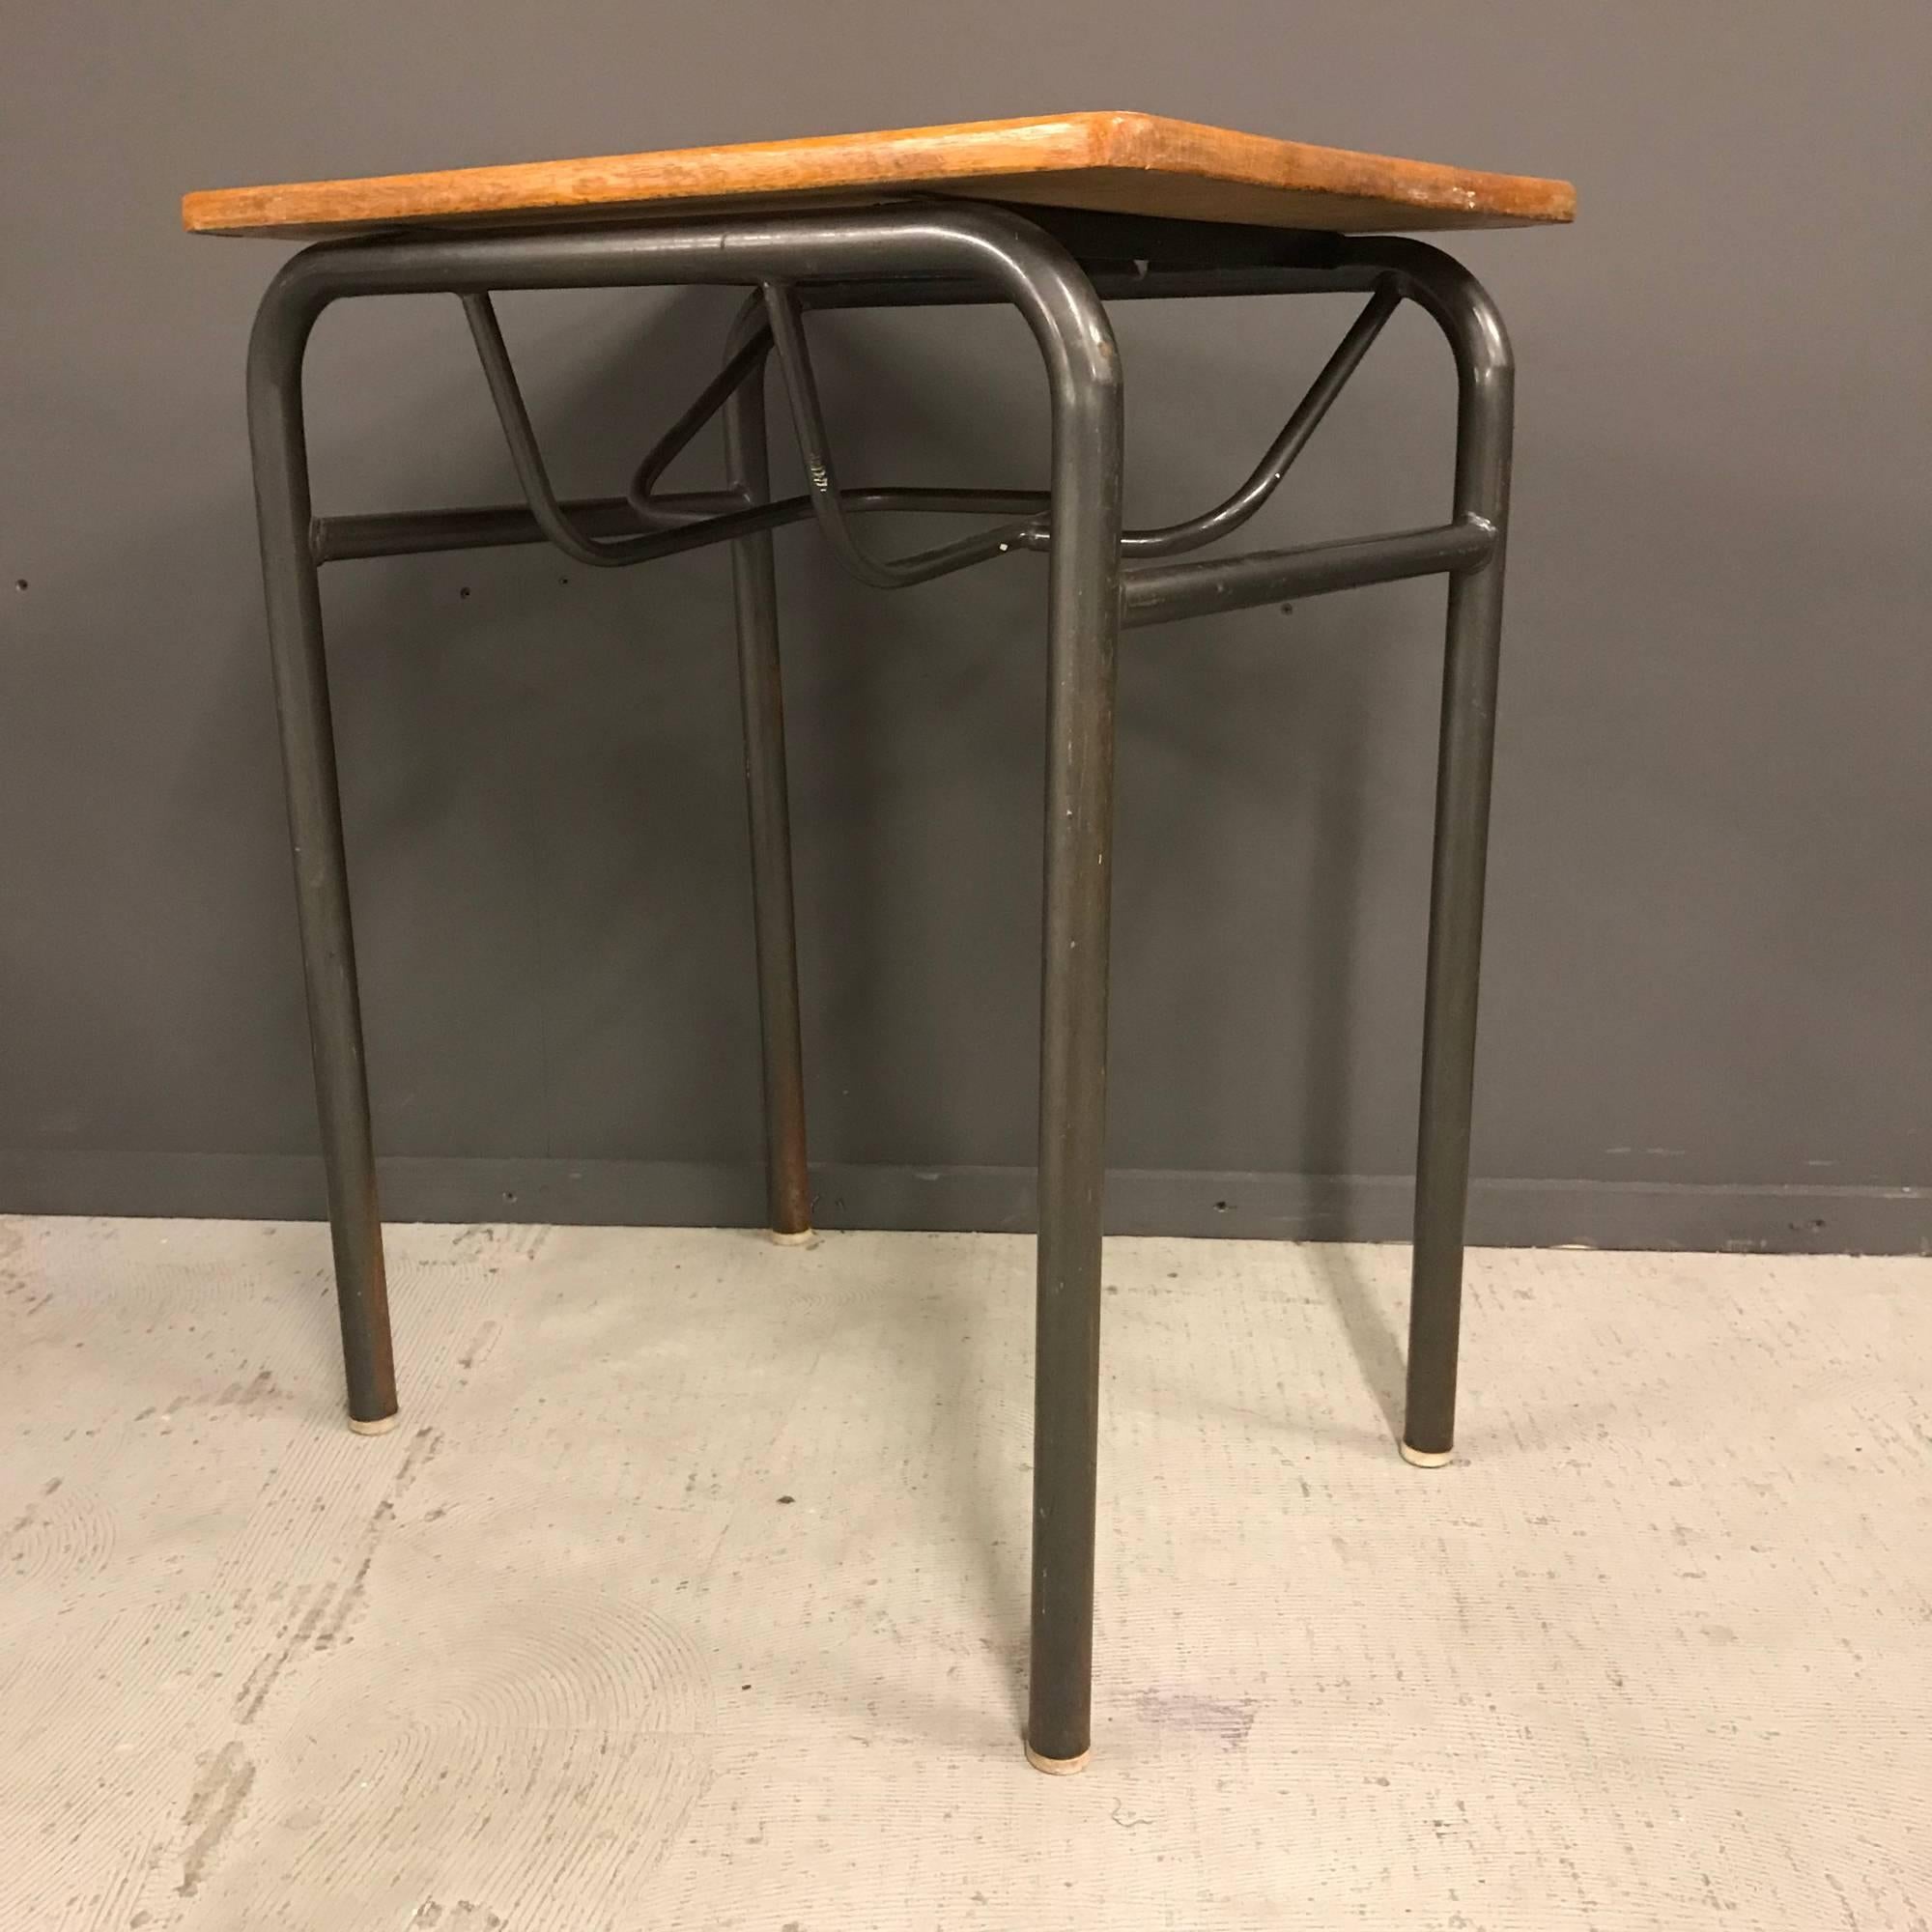 Vintage French school table. Remains in good condition.